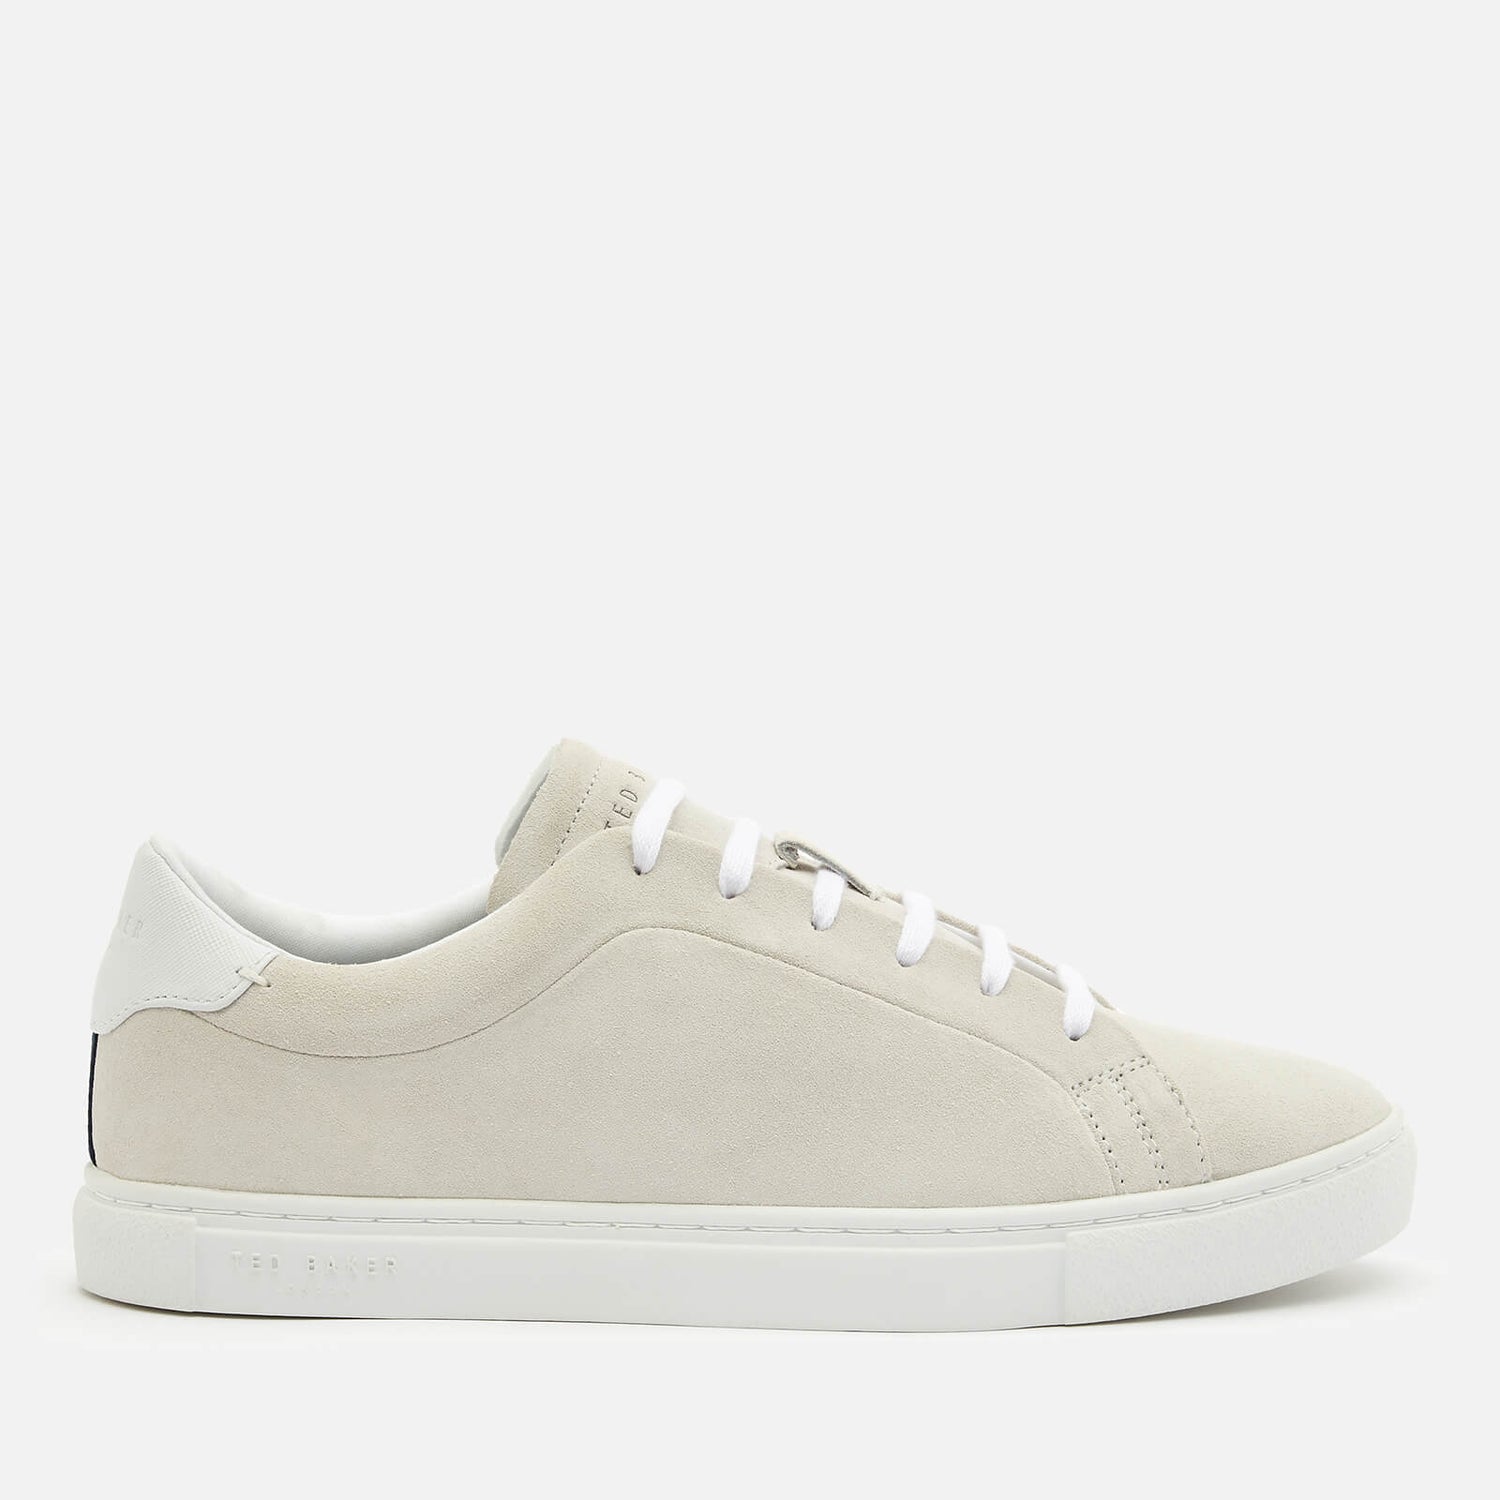 Ted Baker Men's Triloba Suede Cupsole Trainers - White | TheHut.com